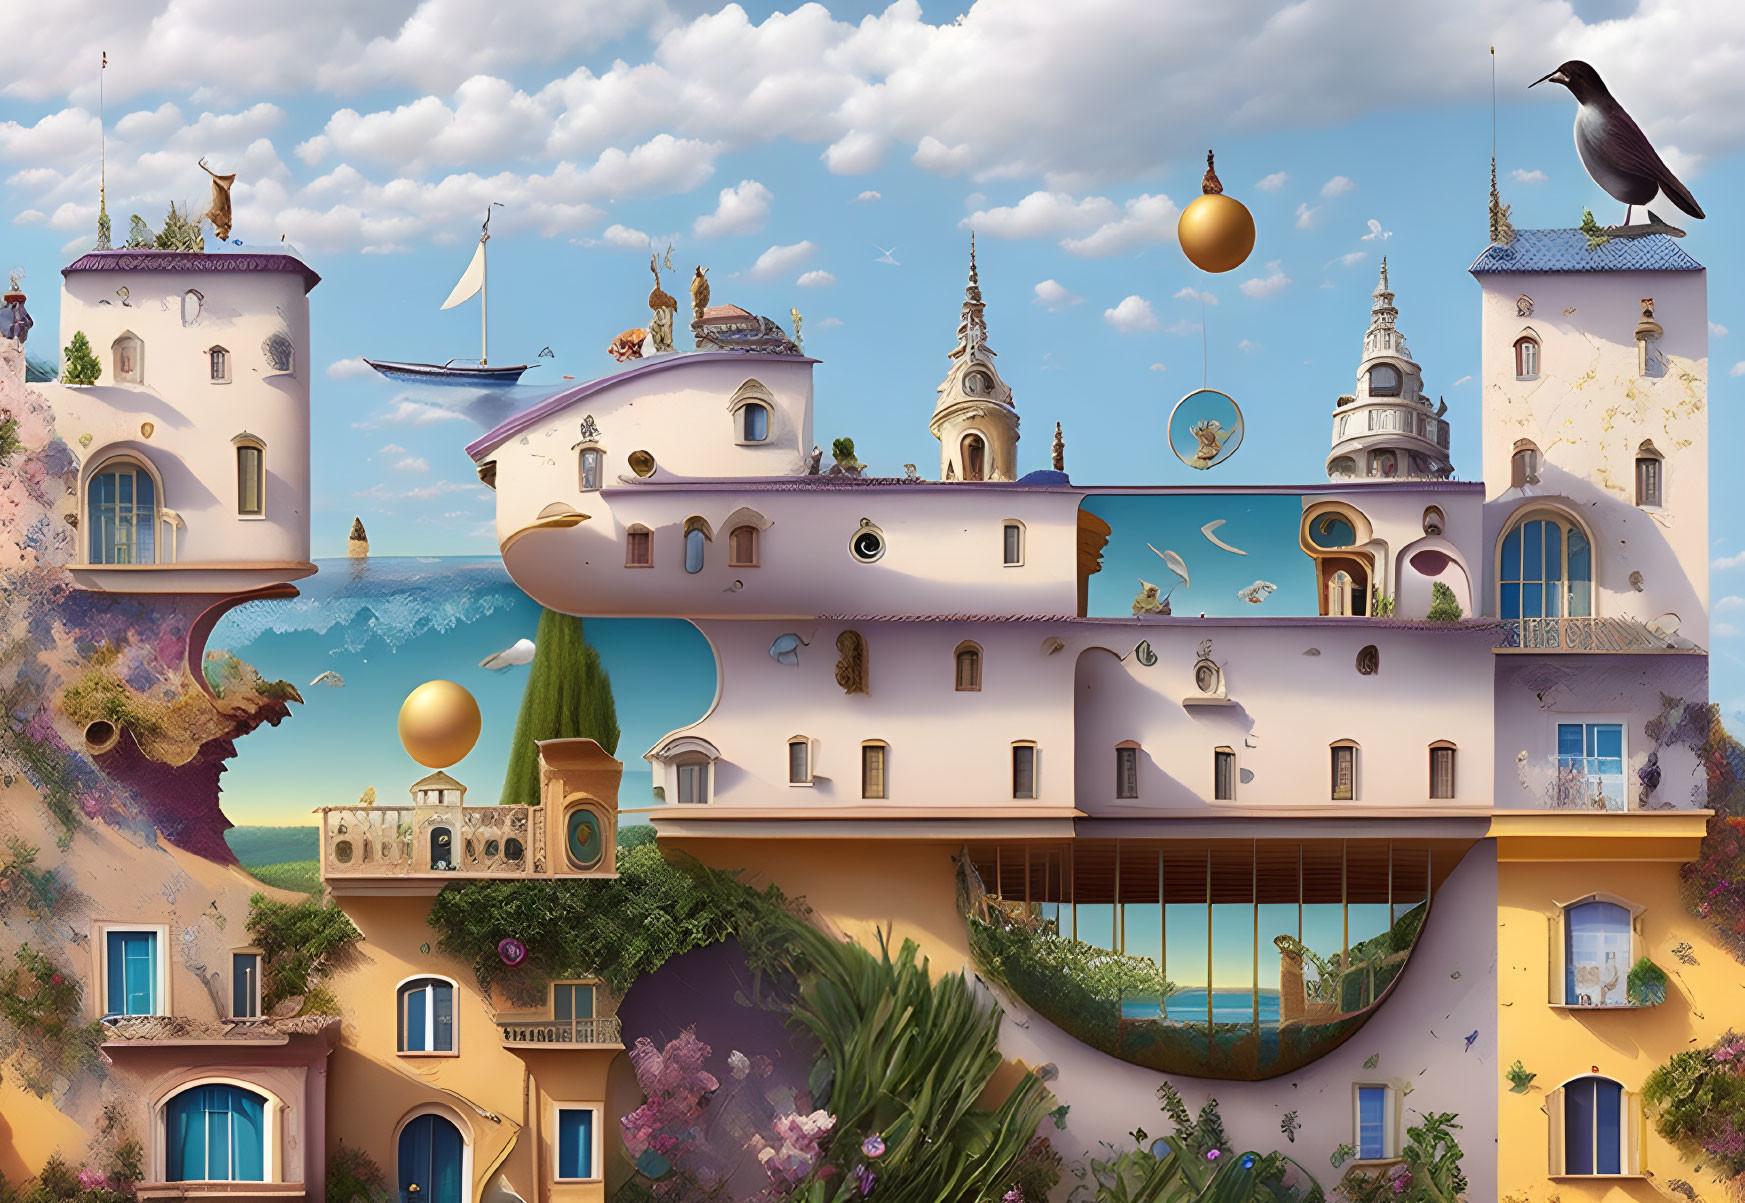 Surrealistic landscape with castles, spheres, bird, and flora